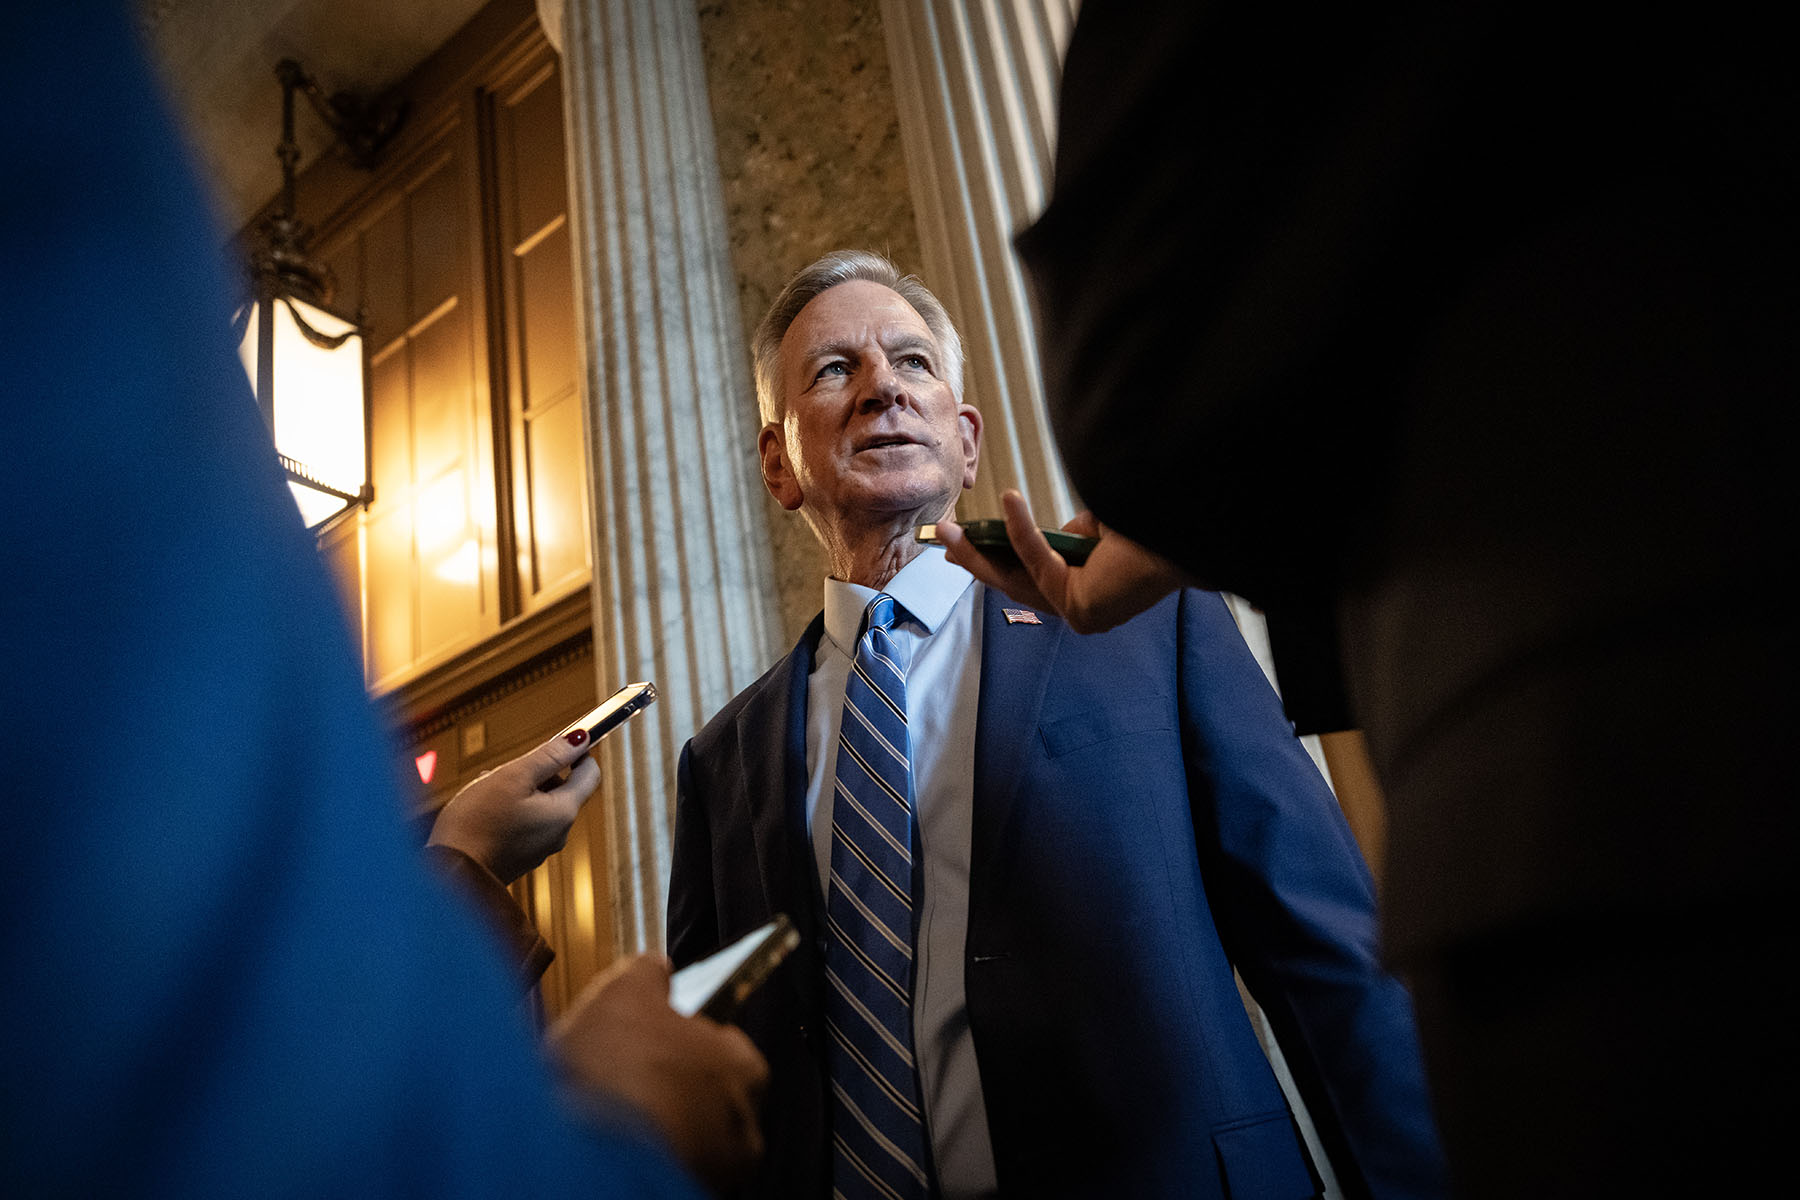 Sen. Tommy Tuberville speaks to reporters on his way to a closed-door lunch meeting with Senate Republicans.